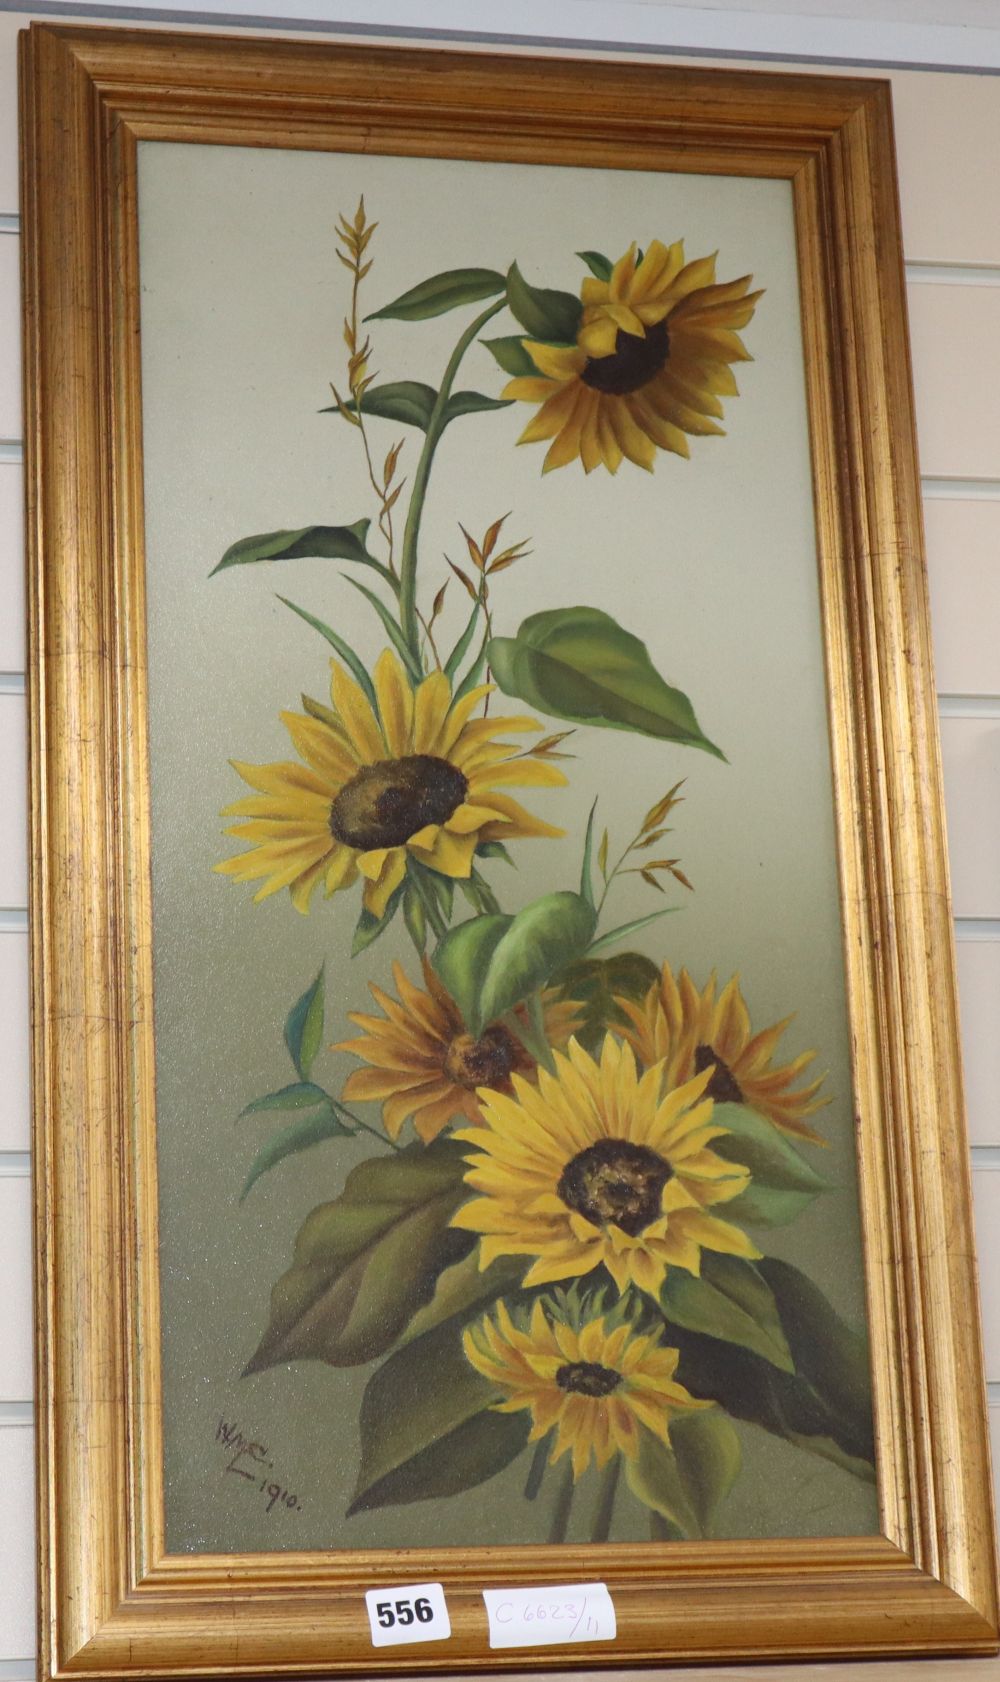 WMC, early 20th century, oil on board, Study of sunflowers, initialed WMC and dated 1910, 59 x 29cm